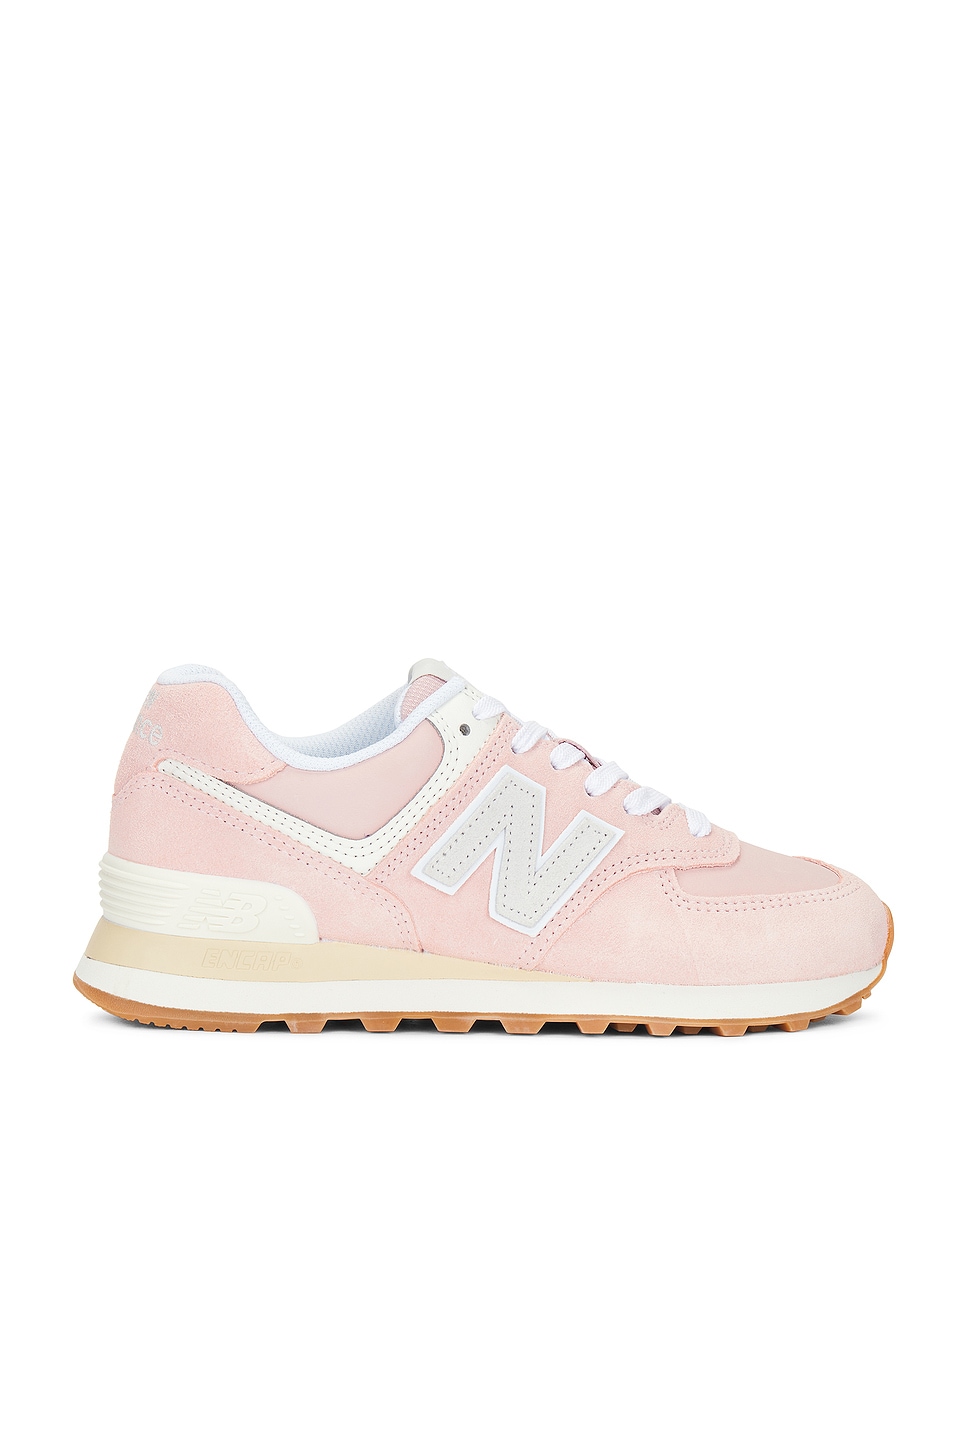 Image 1 of New Balance 574 Sneaker in Orb Pink & Grey Matter